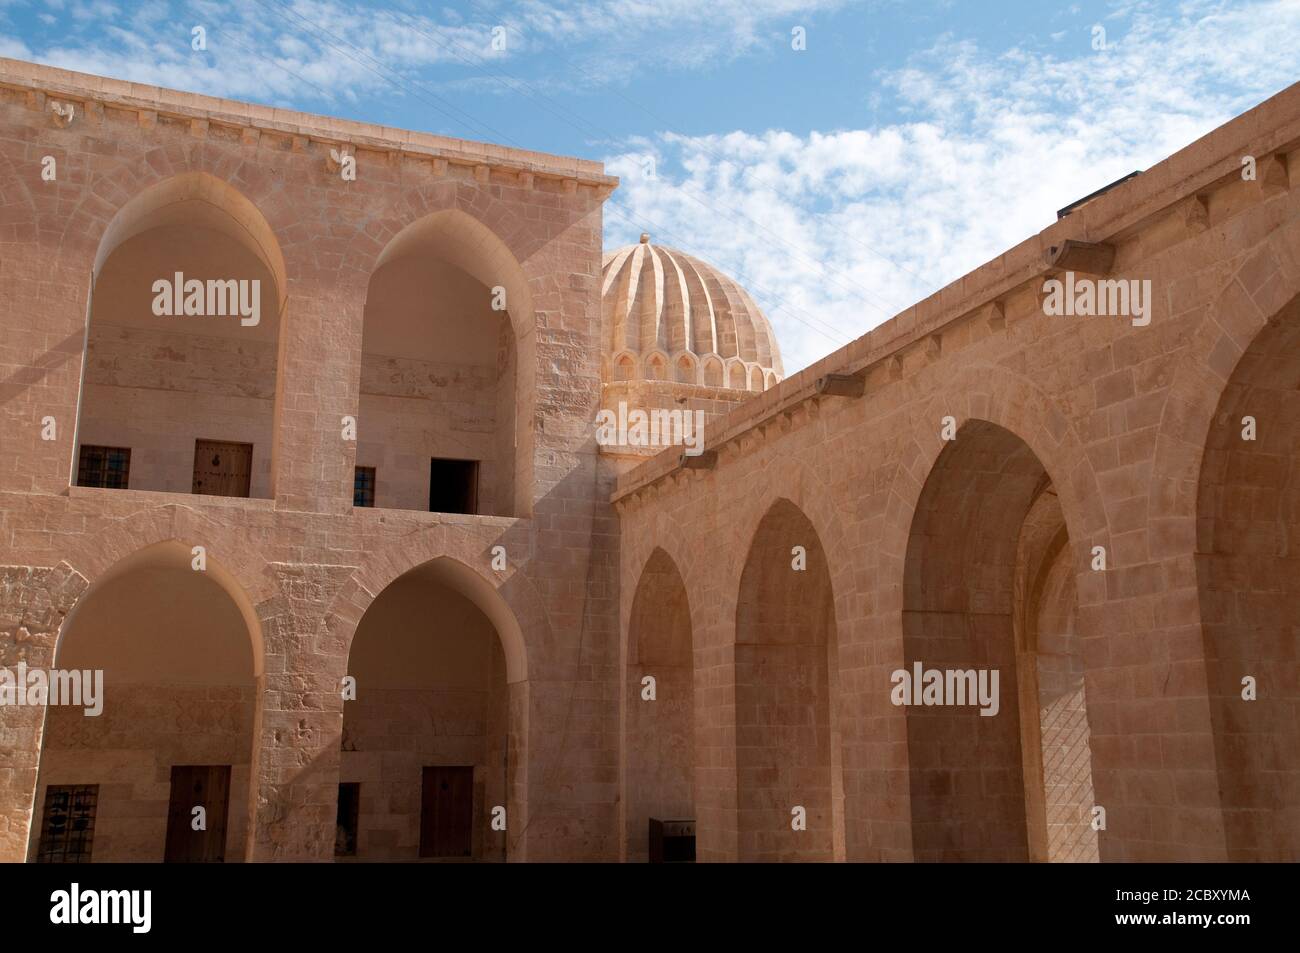 The courtyard of Kasimiye Medresesi, a medieval 15th century mosque and religious school in the of city Mardin, eastern Anatolia, Turkey. Stock Photo